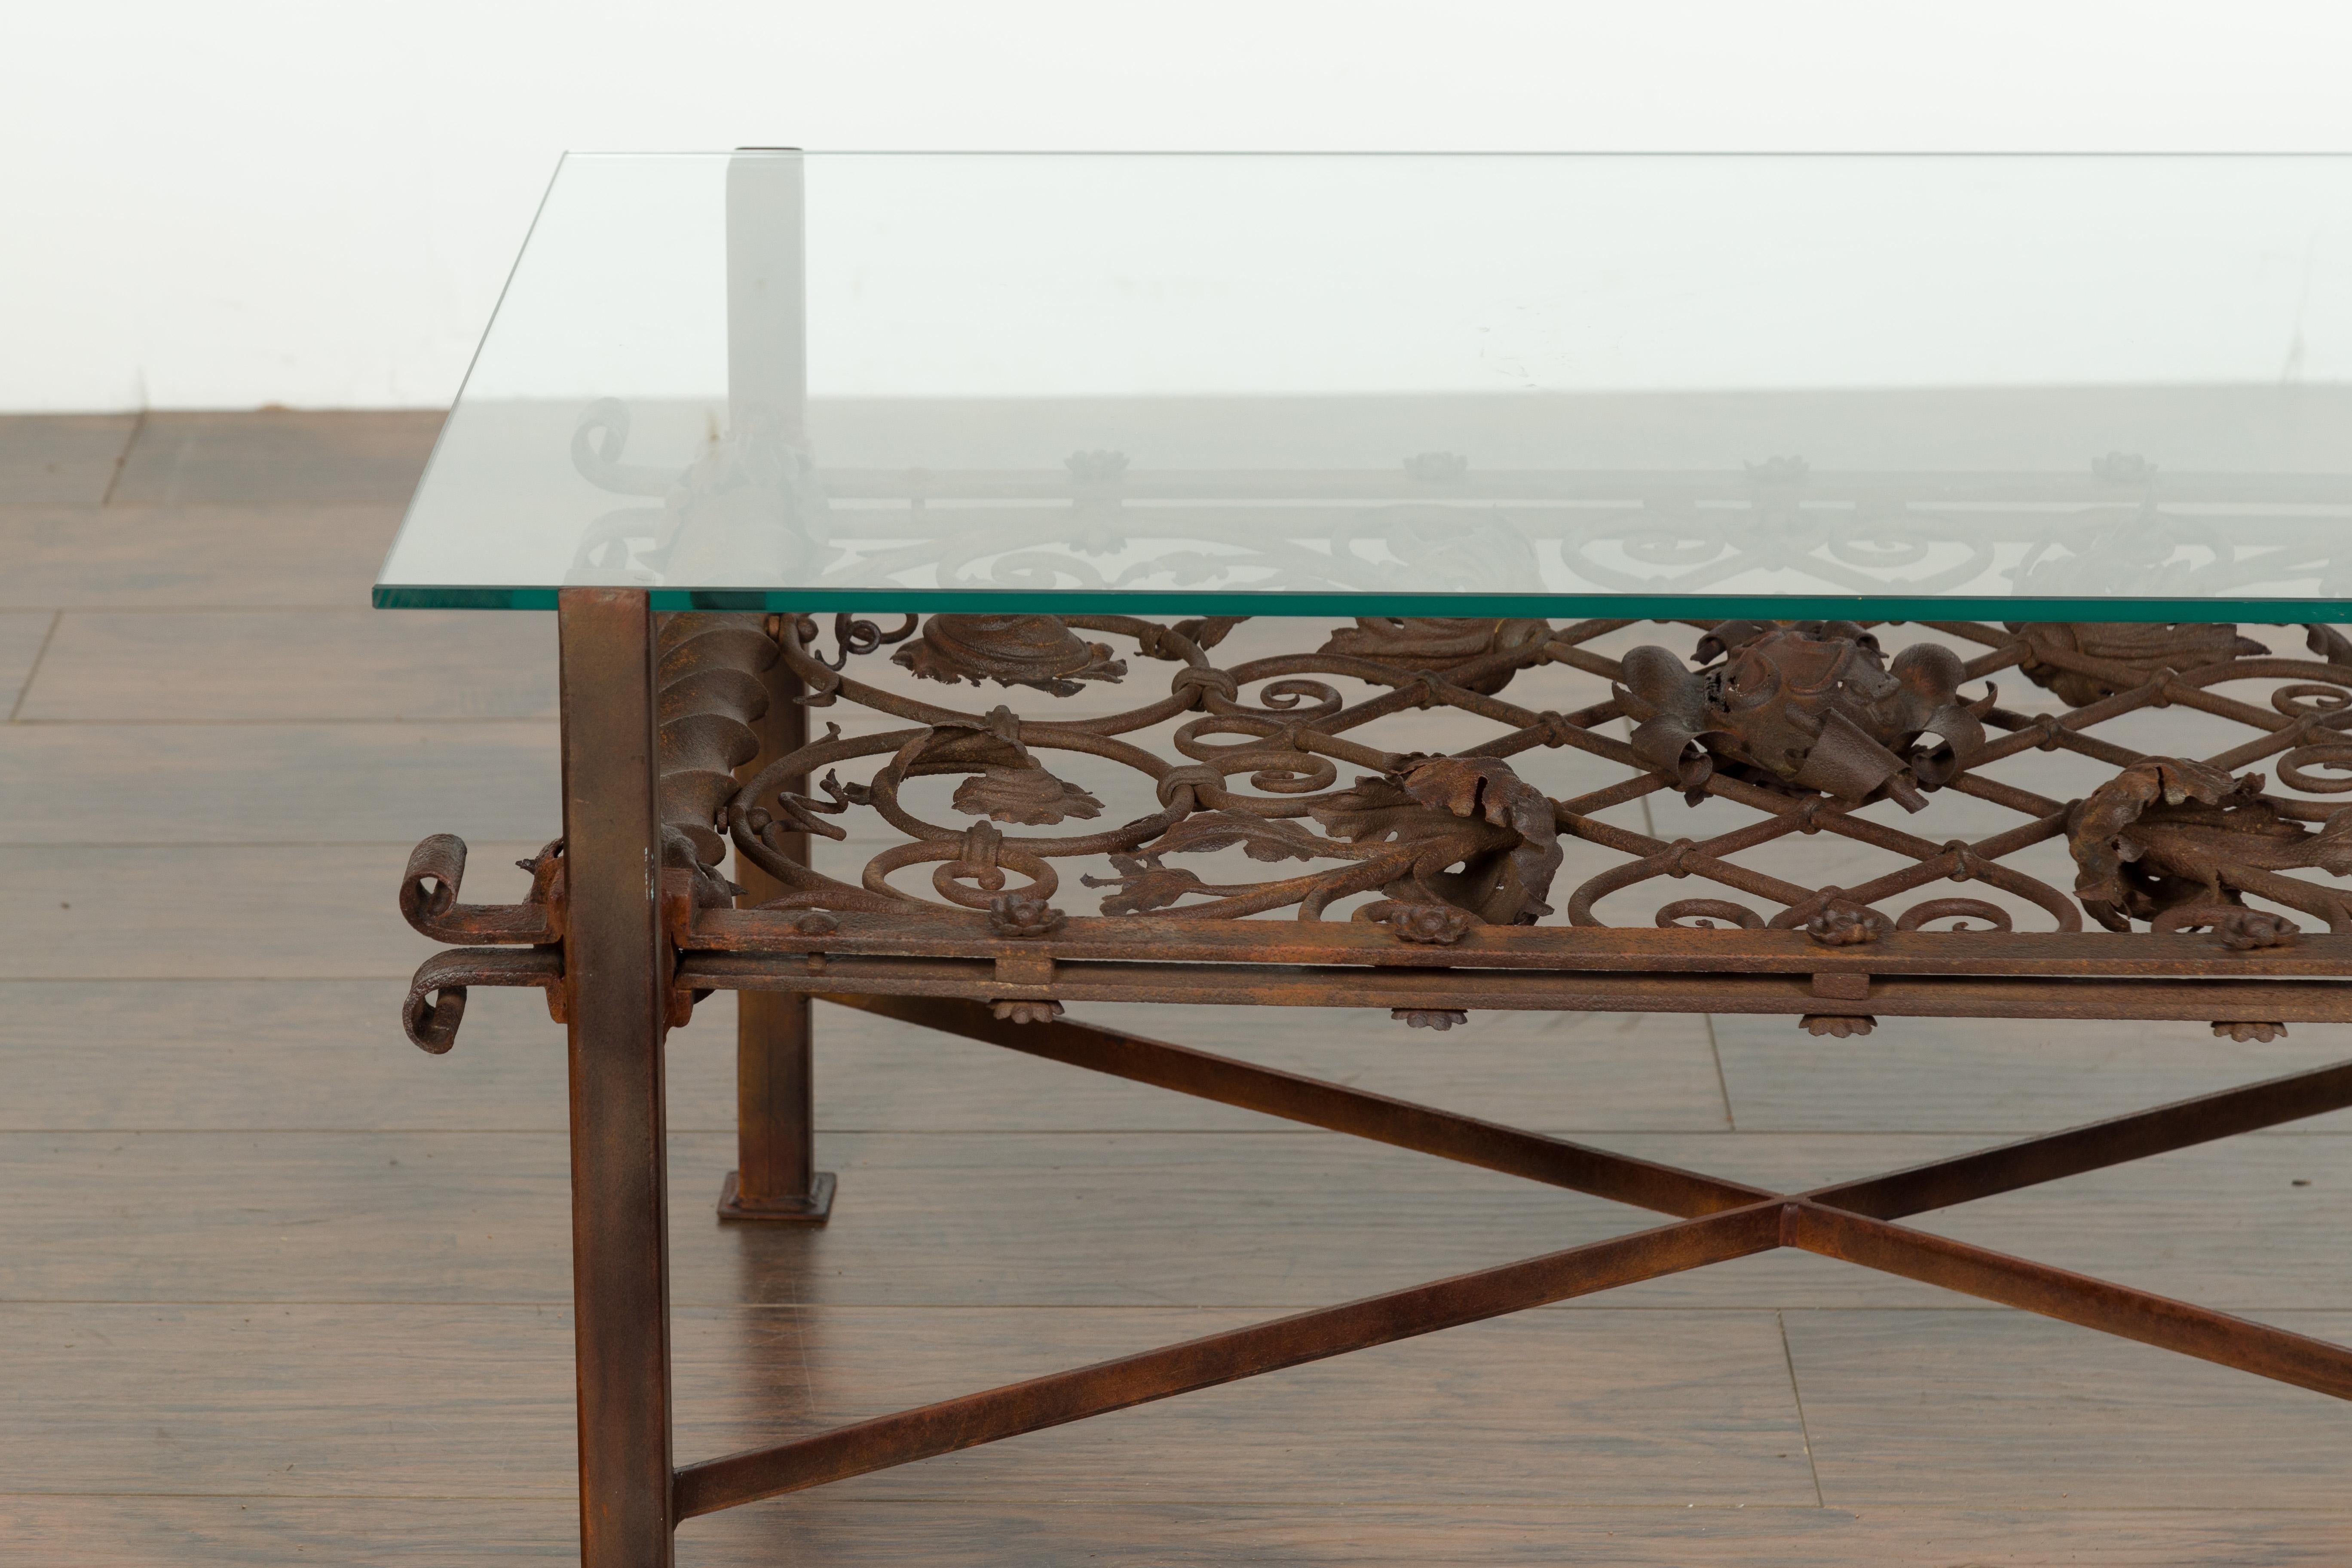 English French 1892 Iron Balcony Fragment Made into a Coffee Table with Glass Top For Sale